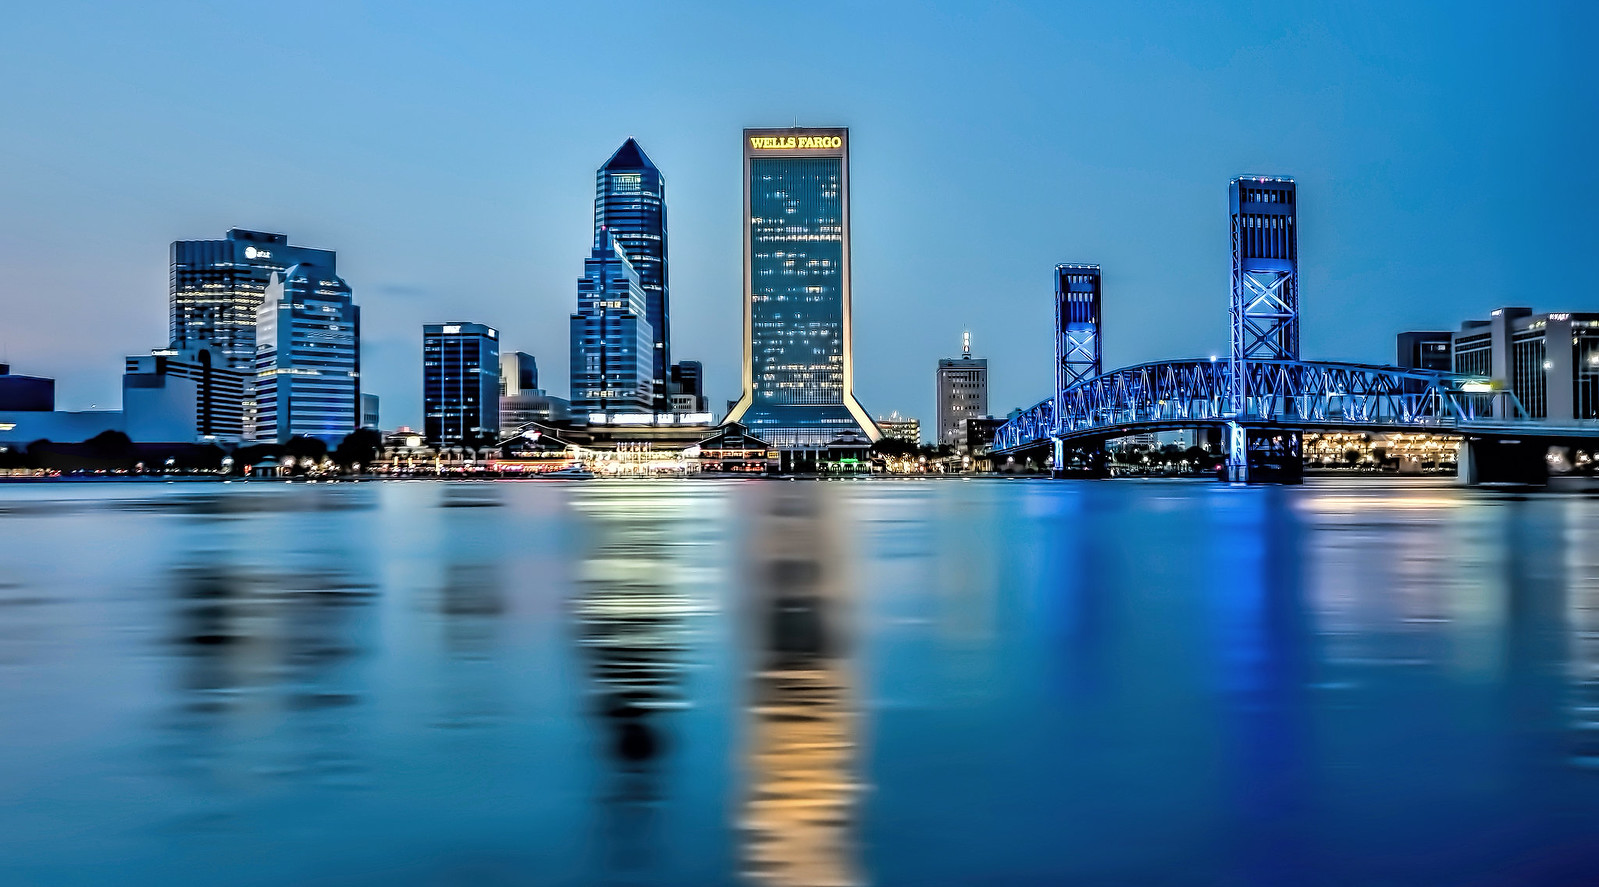 The skyline of Jacksonville, Florida on the shores of the St. Johns River @ the Blue Hour